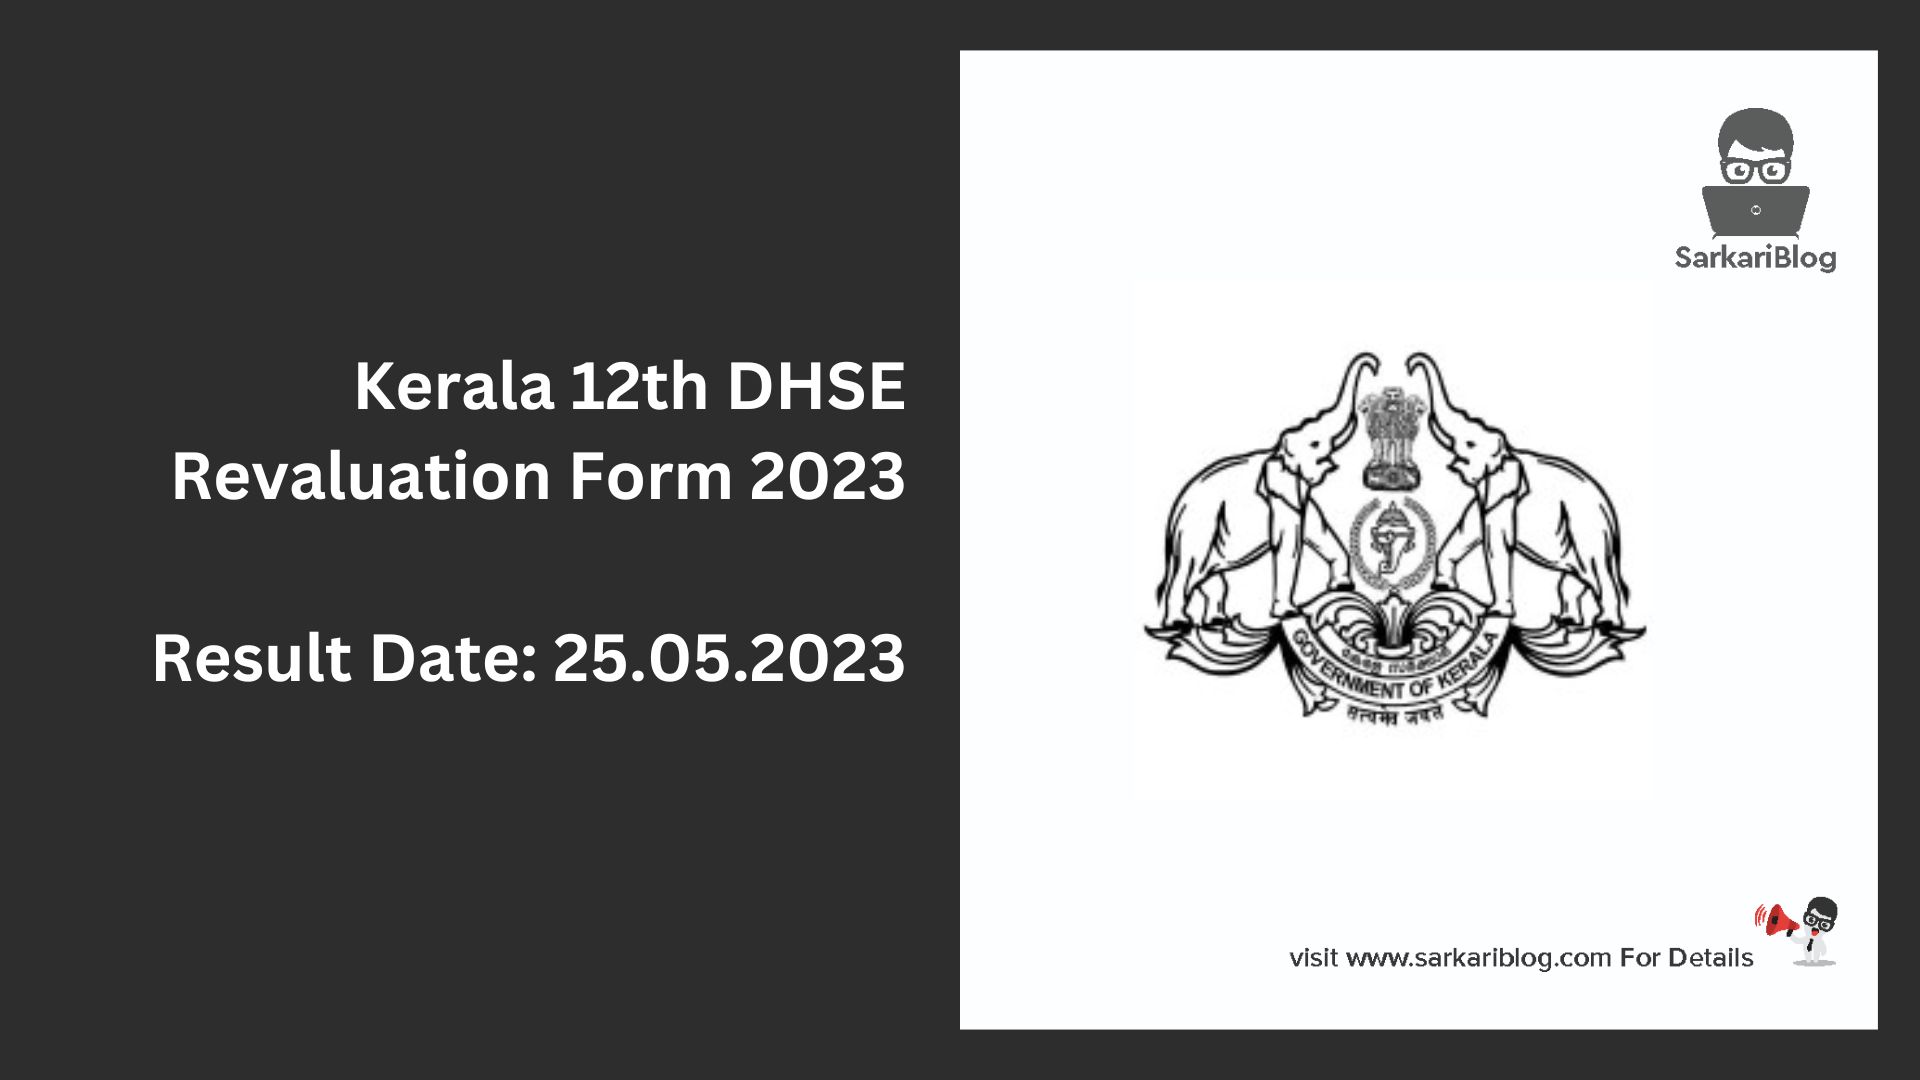 Kerala 12th DHSE Revaluation Form 2023